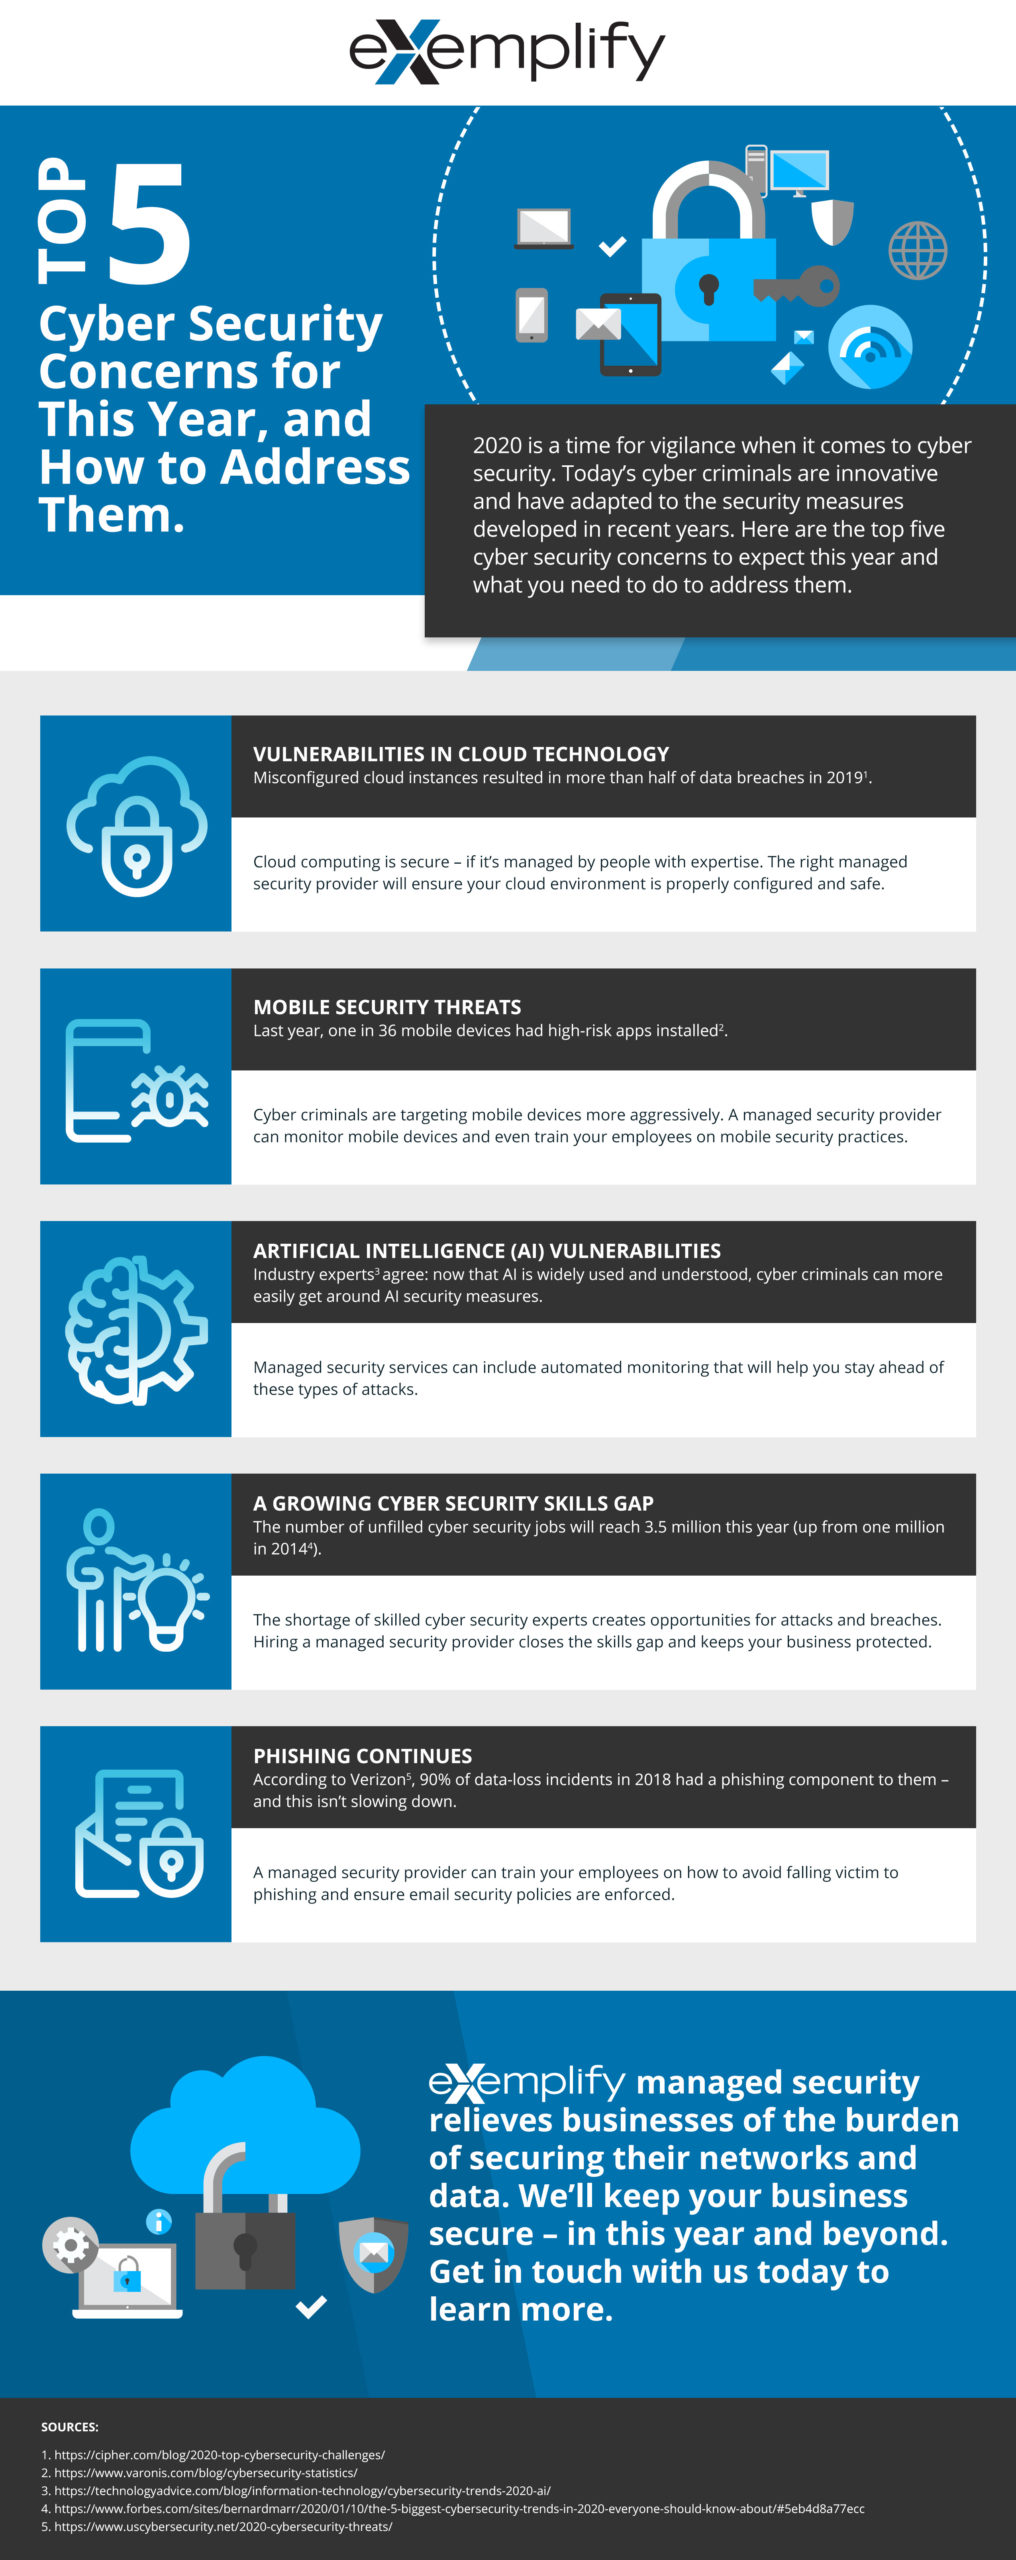 This infographic explains how to address the top five cyber security concerns of 2020.